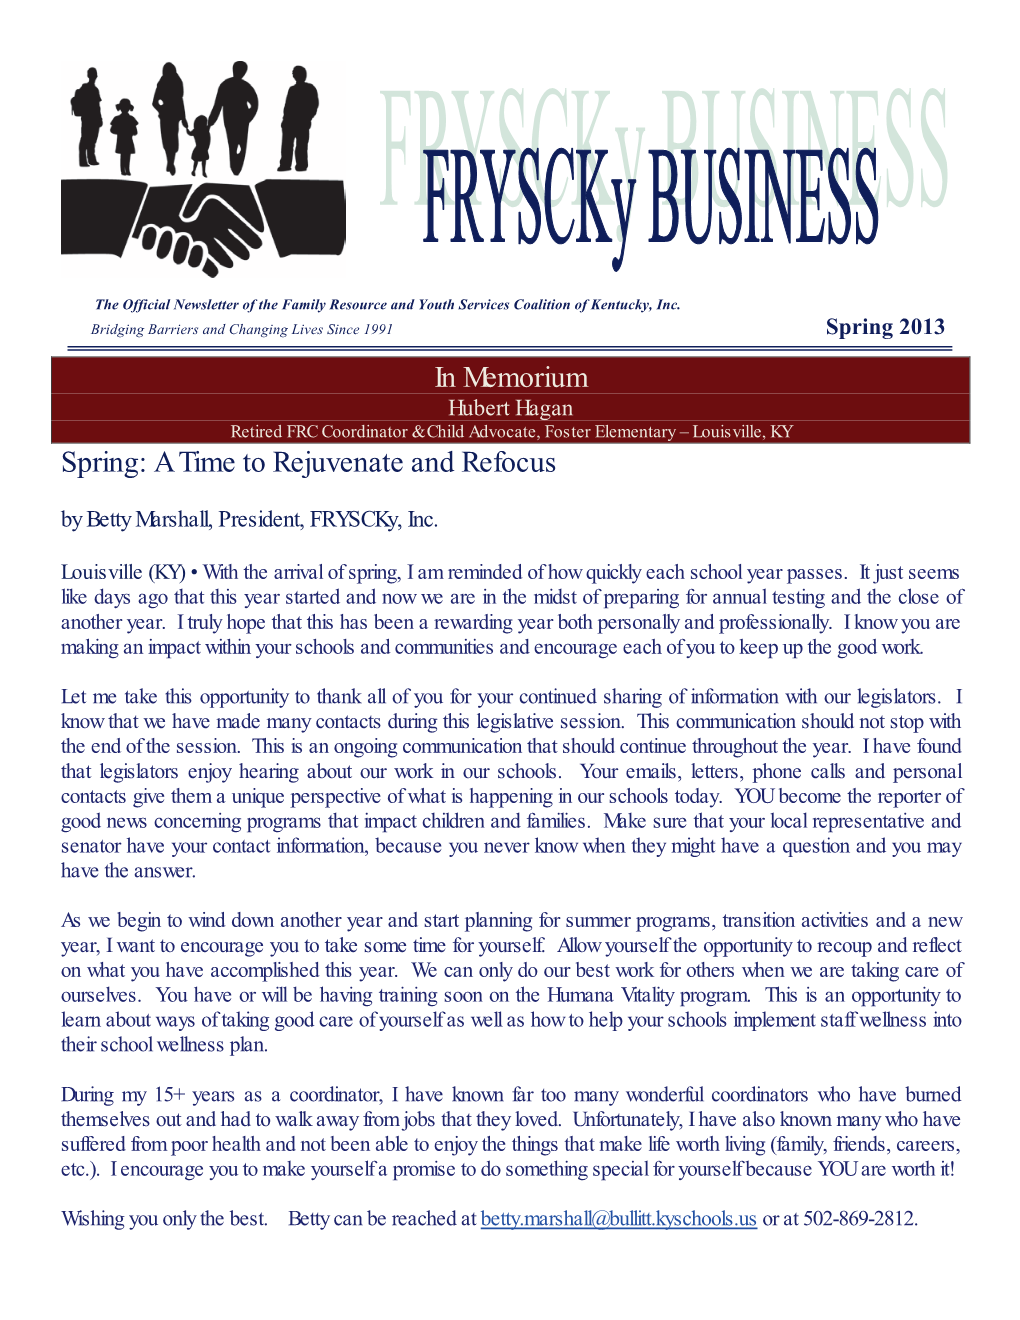 Fryscky Business Is the Official Newsletter of the Family Resource and Youth Services Coalition of Kentucky, Inc